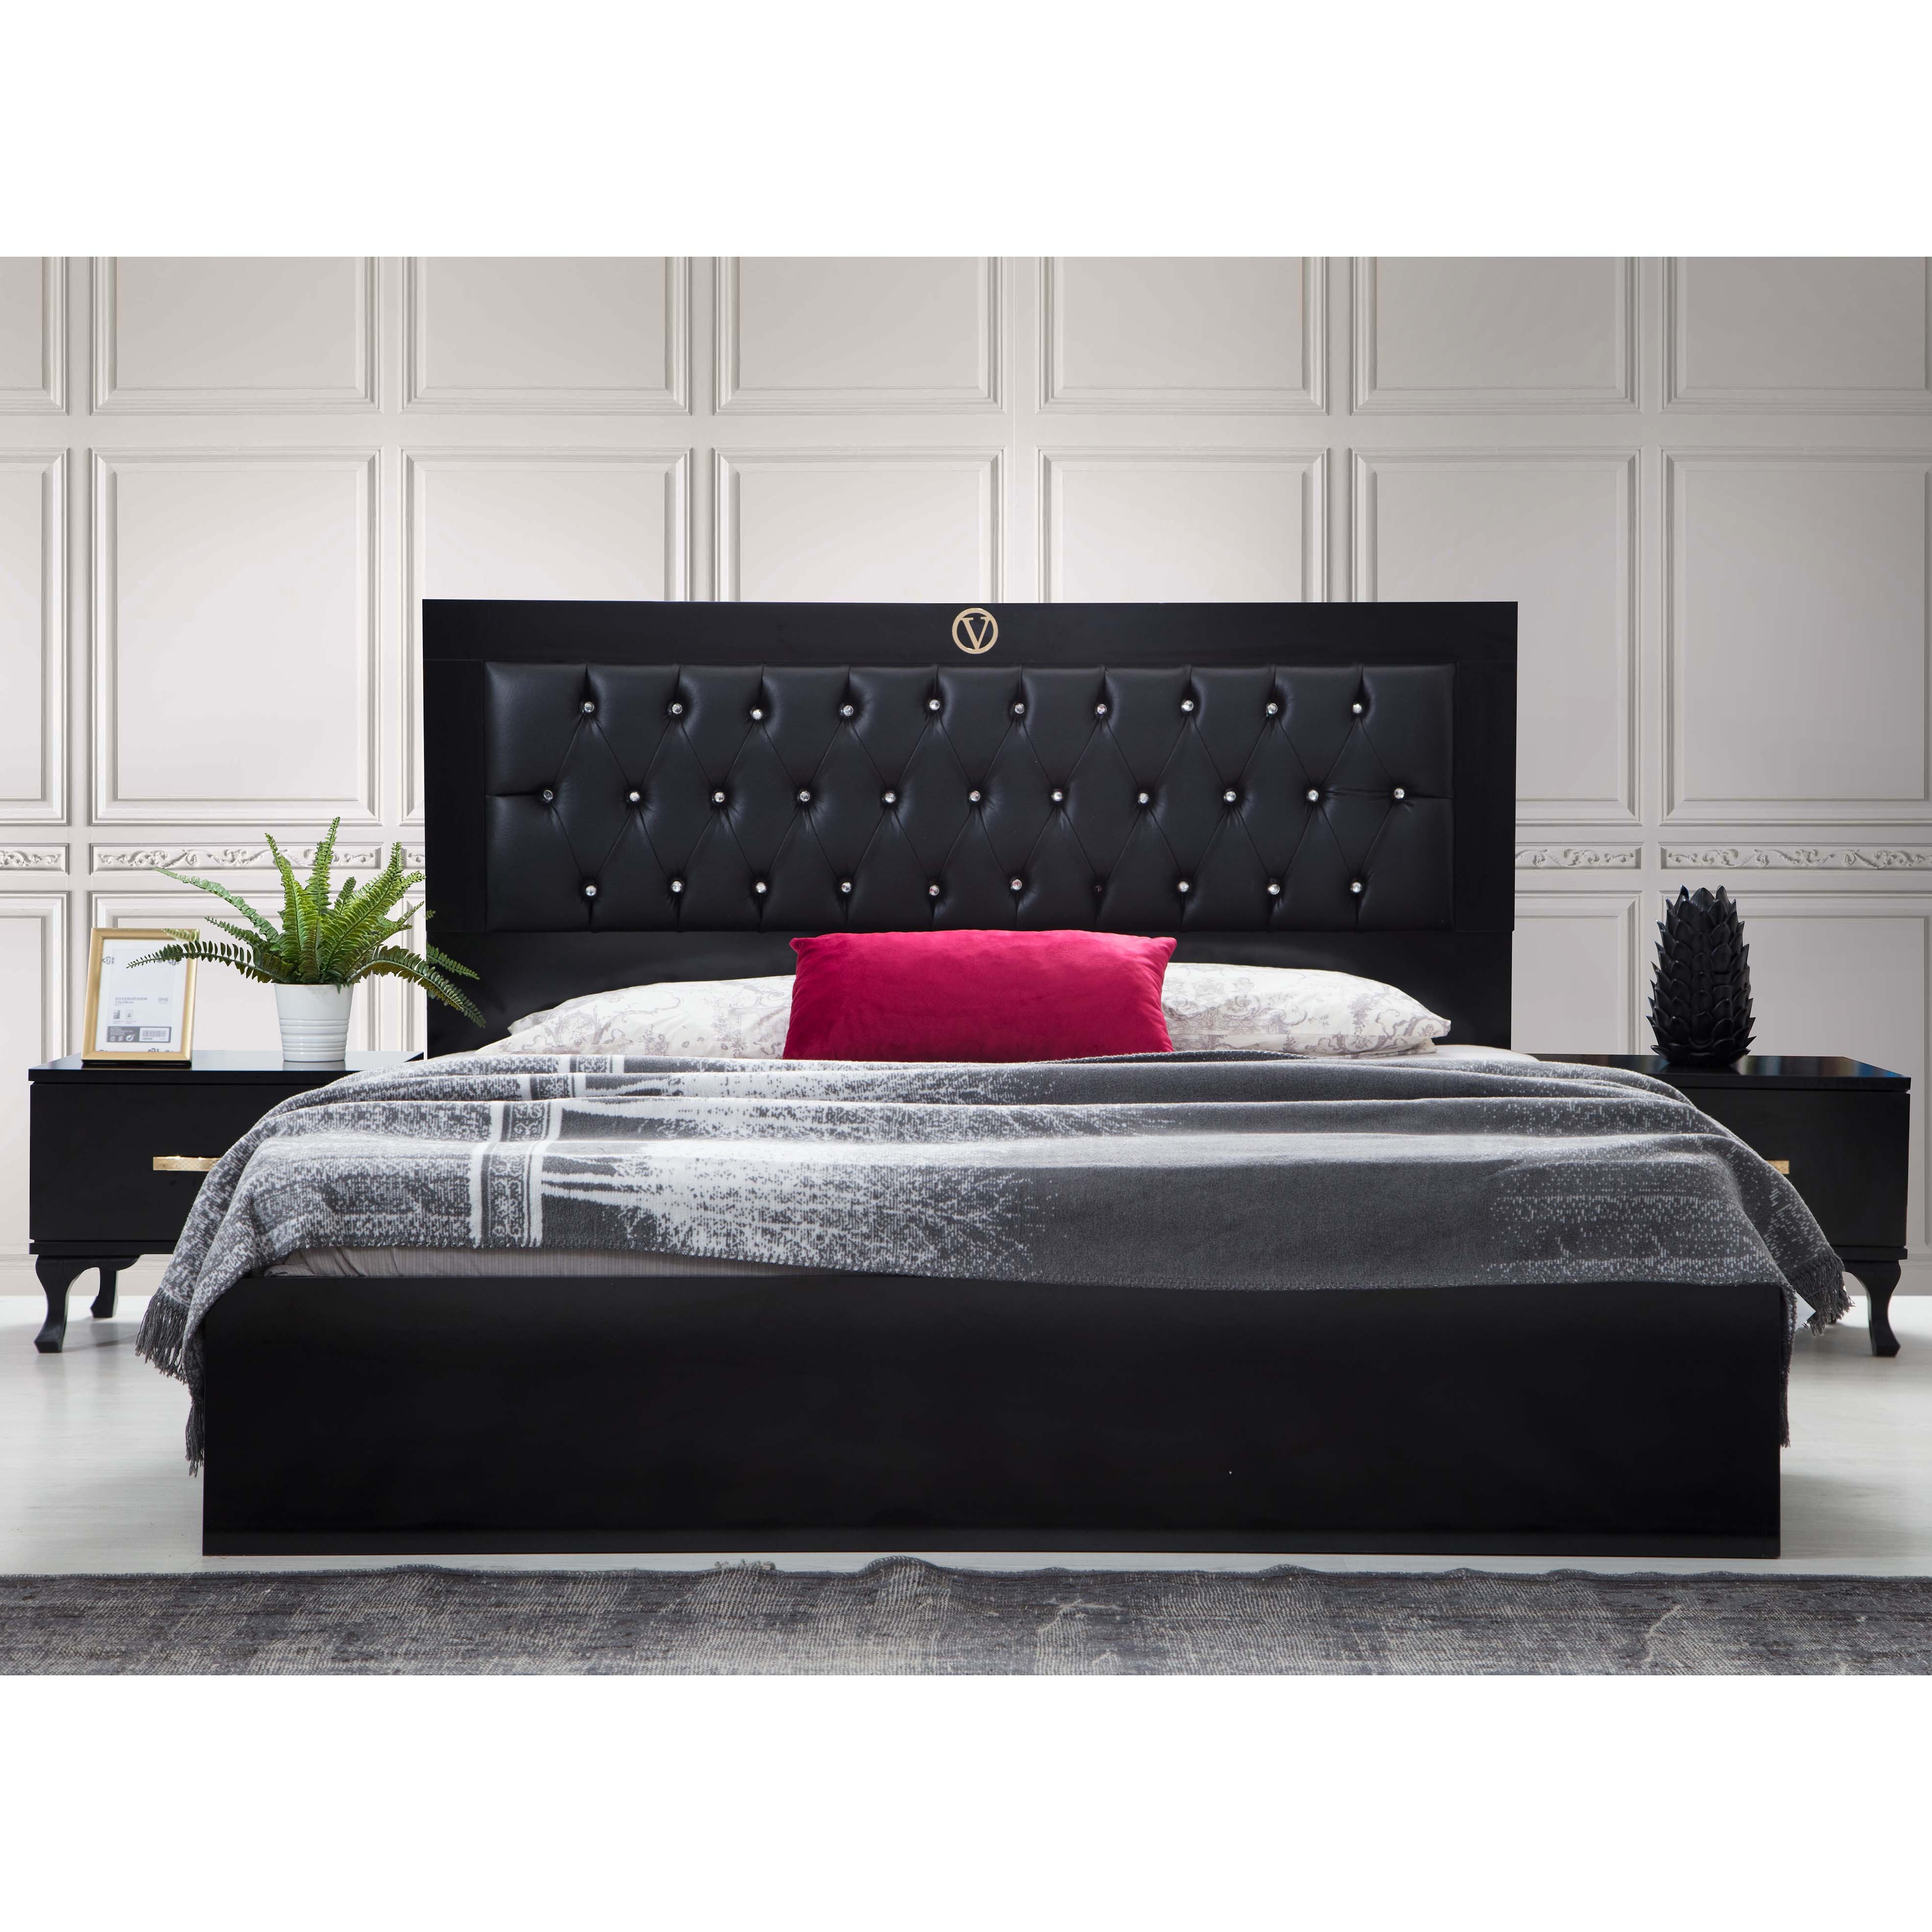 New Versace Bed With Storage 180x200 cm